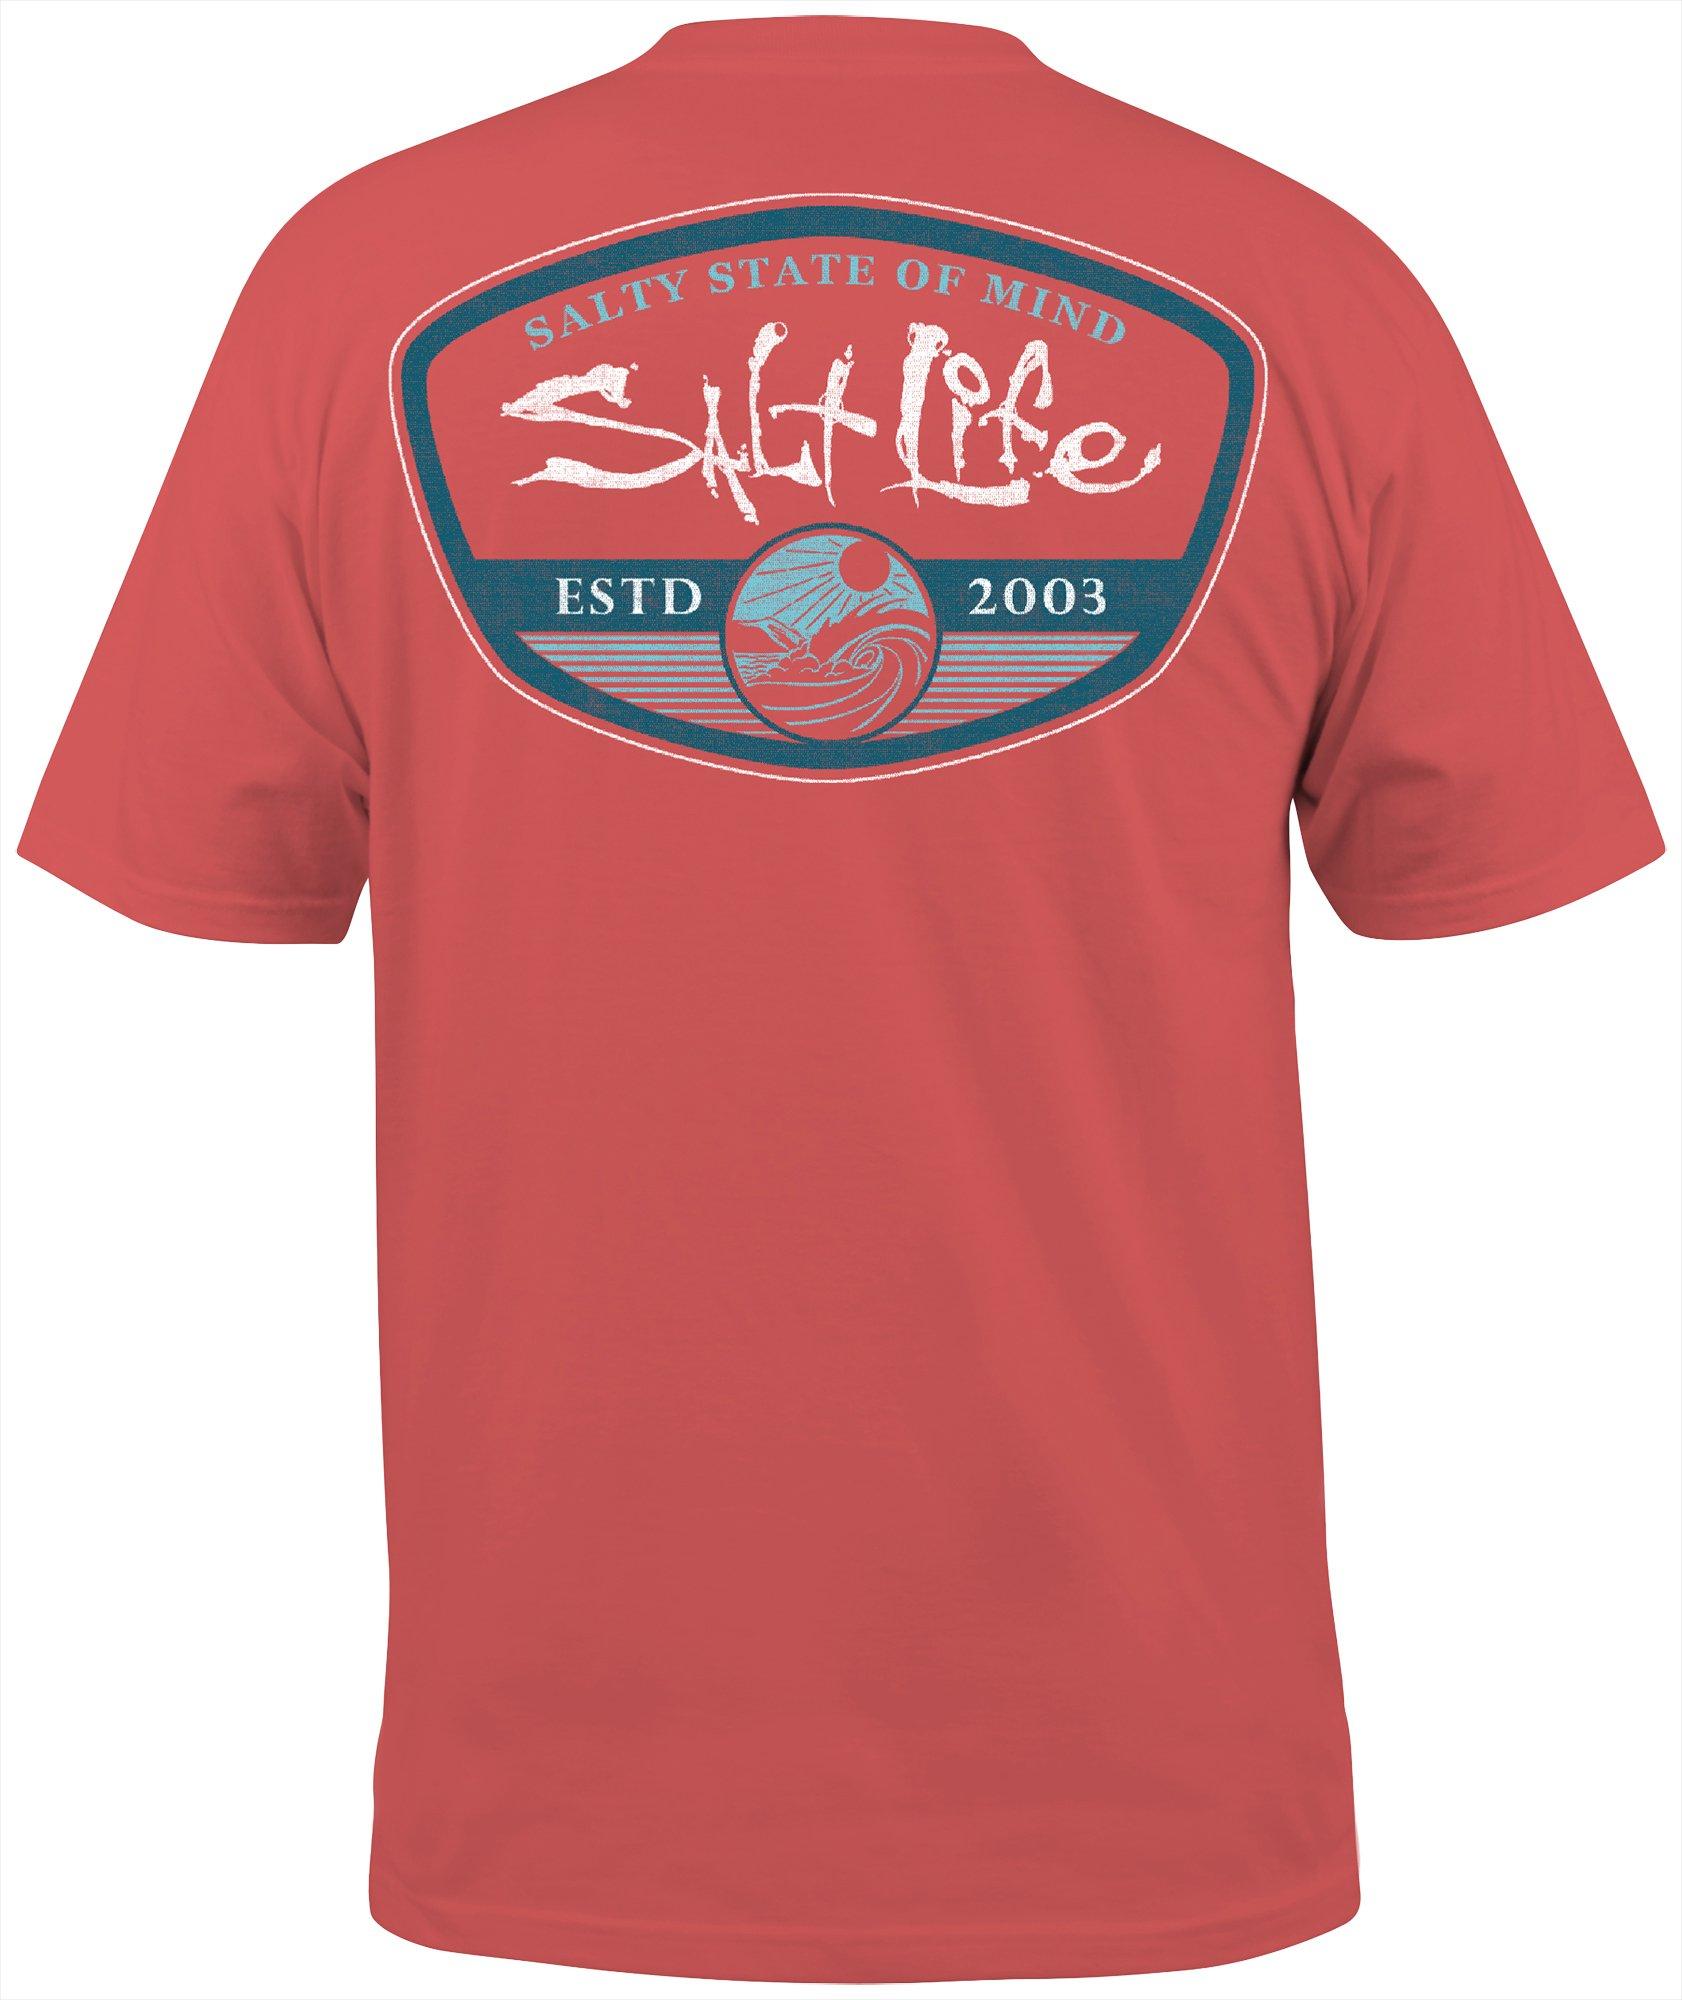 Youth Short Sleeve T-Shirt Love Your Life 